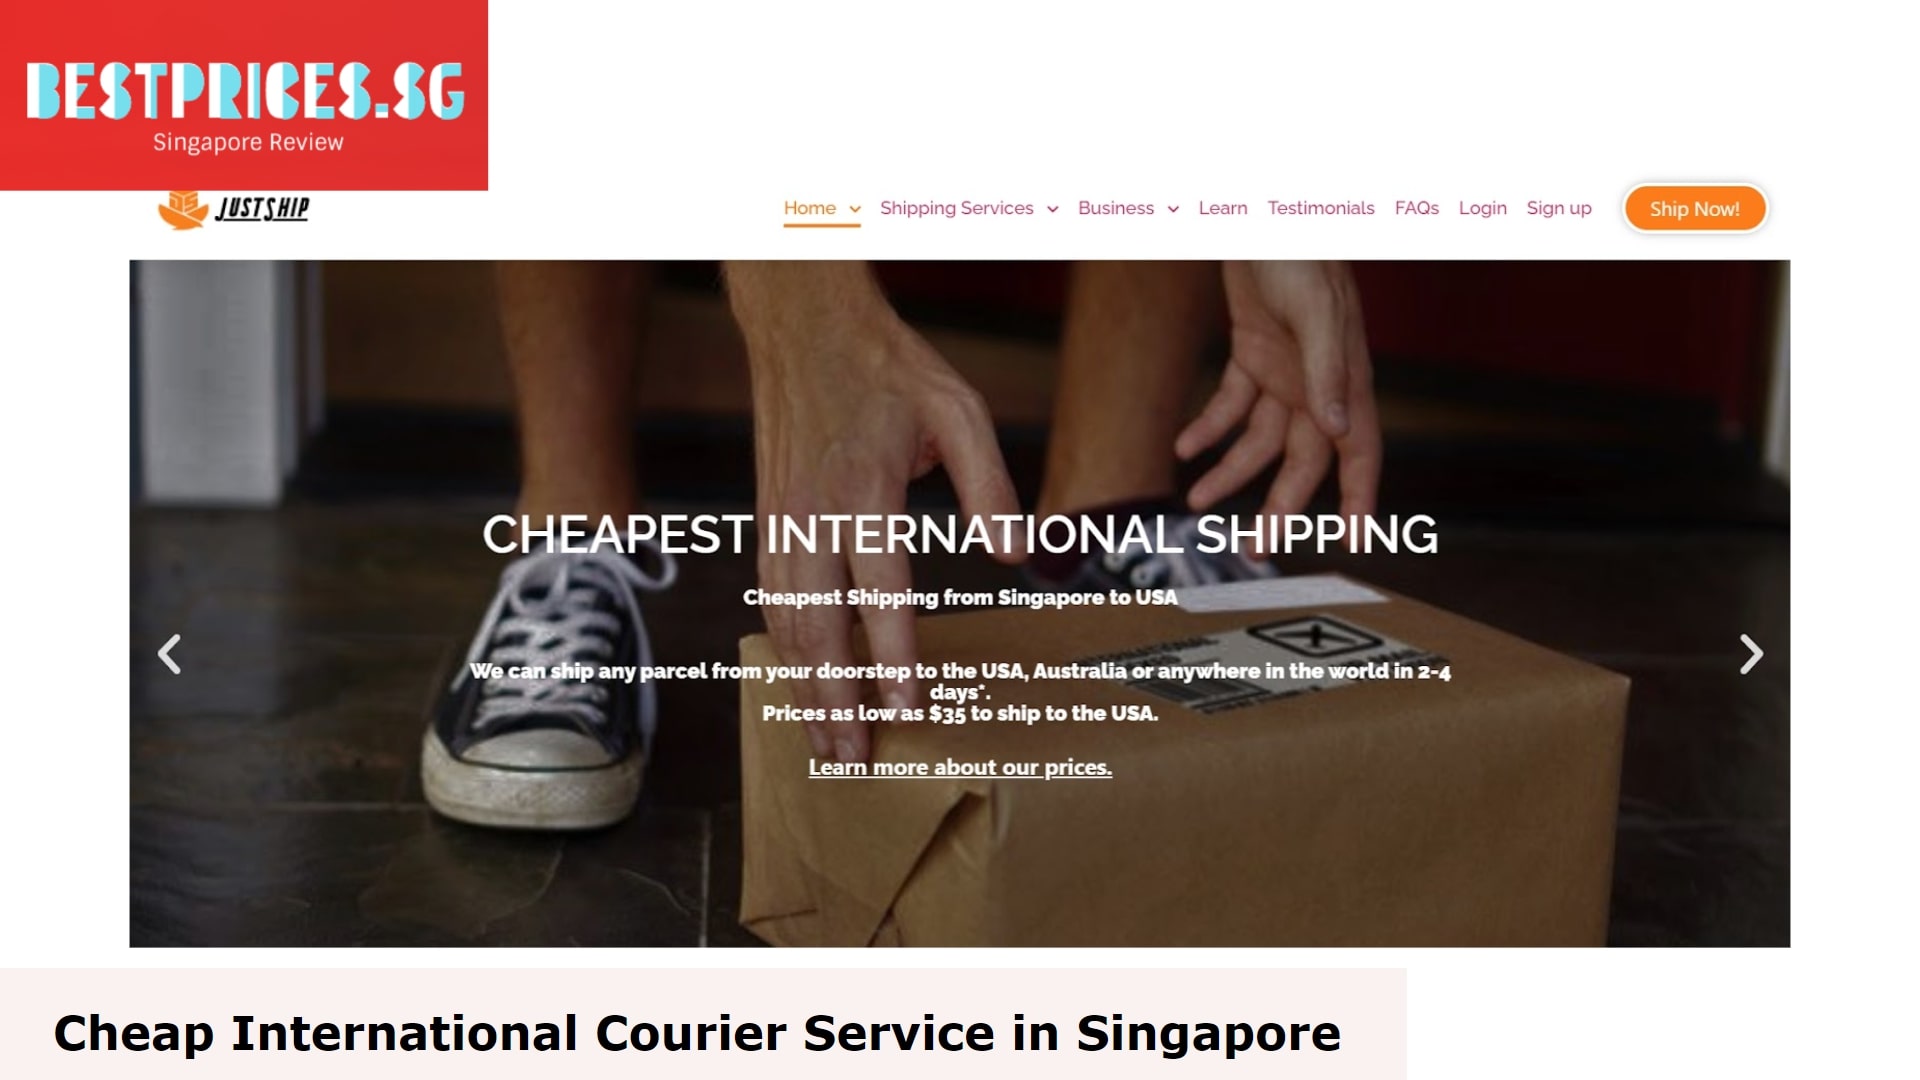 JustShip - Cheap International Courier Service Singapore, Pick up and delivery service, Cheap International Courier Service Singapore, How do I arrange for courier pickup?, Can Ninja Van pick up parcel?, Which courier service is cheapest for International?, How do I send a 20kg parcel?, How much is international shipping to Singapore?, What is the best international parcel delivery service?, best international courier service singapore, cheap courier service singapore, international courier service singapore to india, cheapest shipping from singapore to usa, cheap courier service singapore to malaysia, local courier service singapore, pickup and delivery service singapore, door to door delivery singapore,